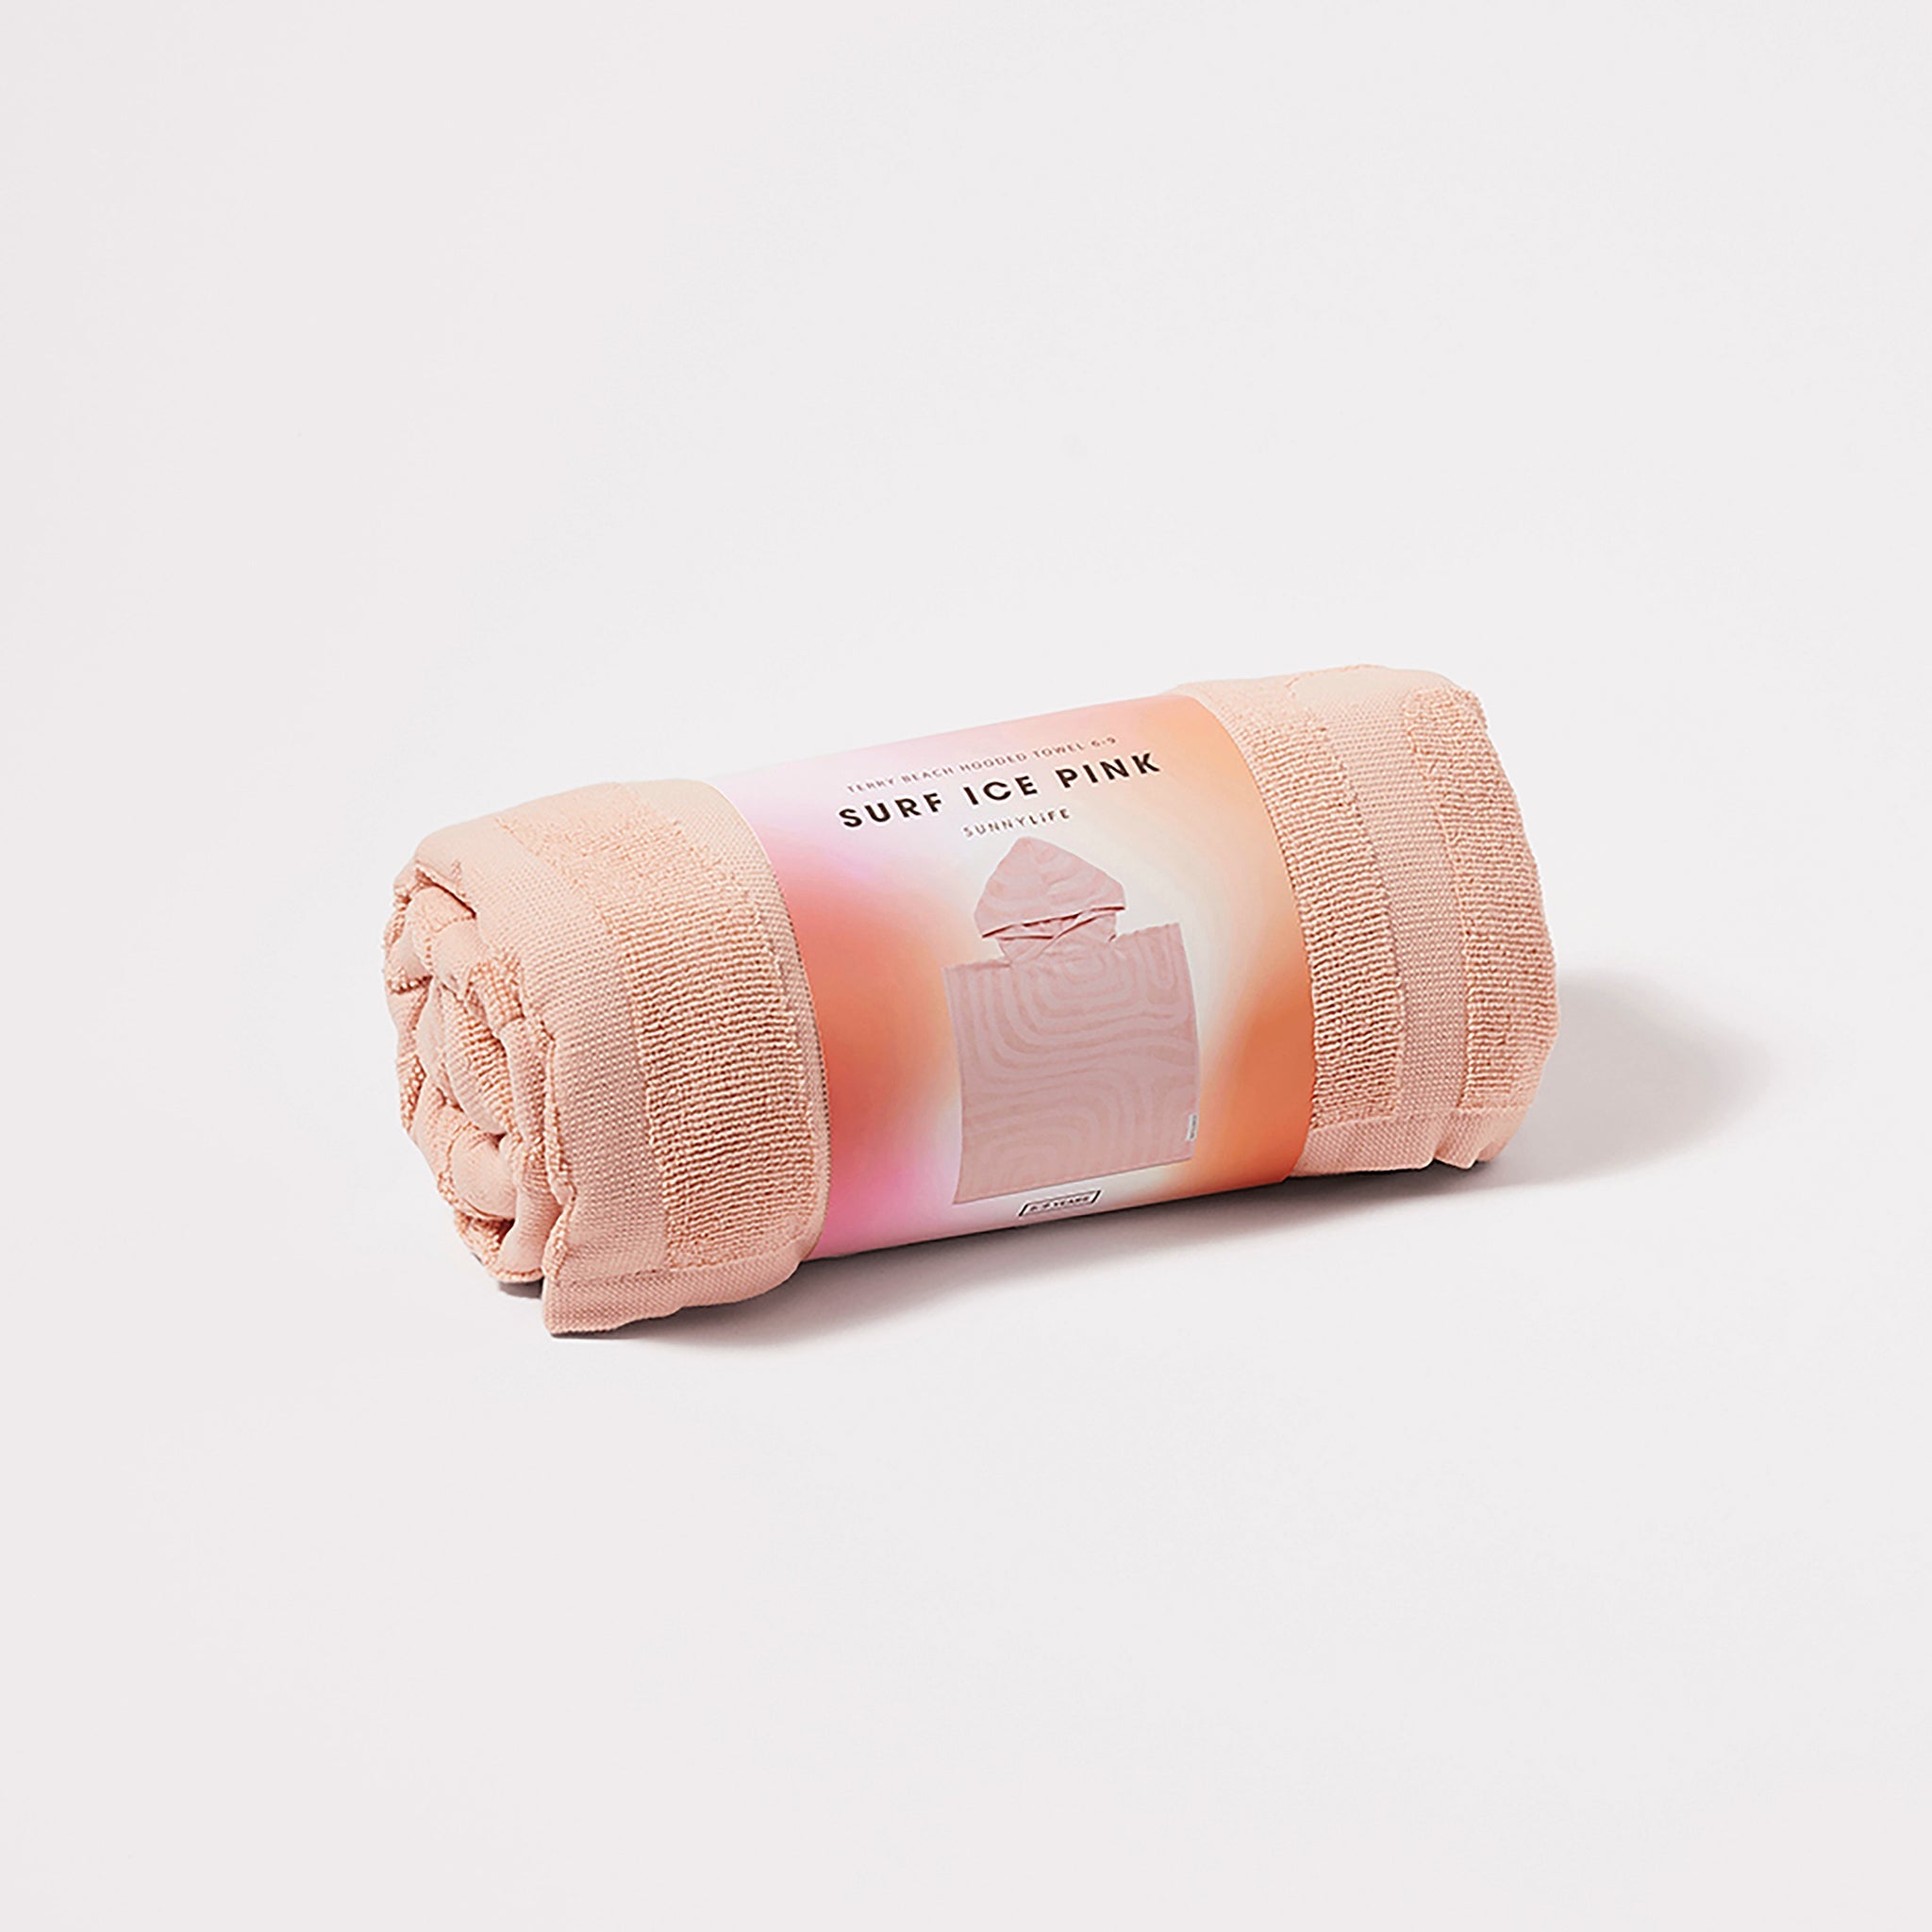 Terry Beach Hooded Towel 6-9 | Surf- Ice Pink